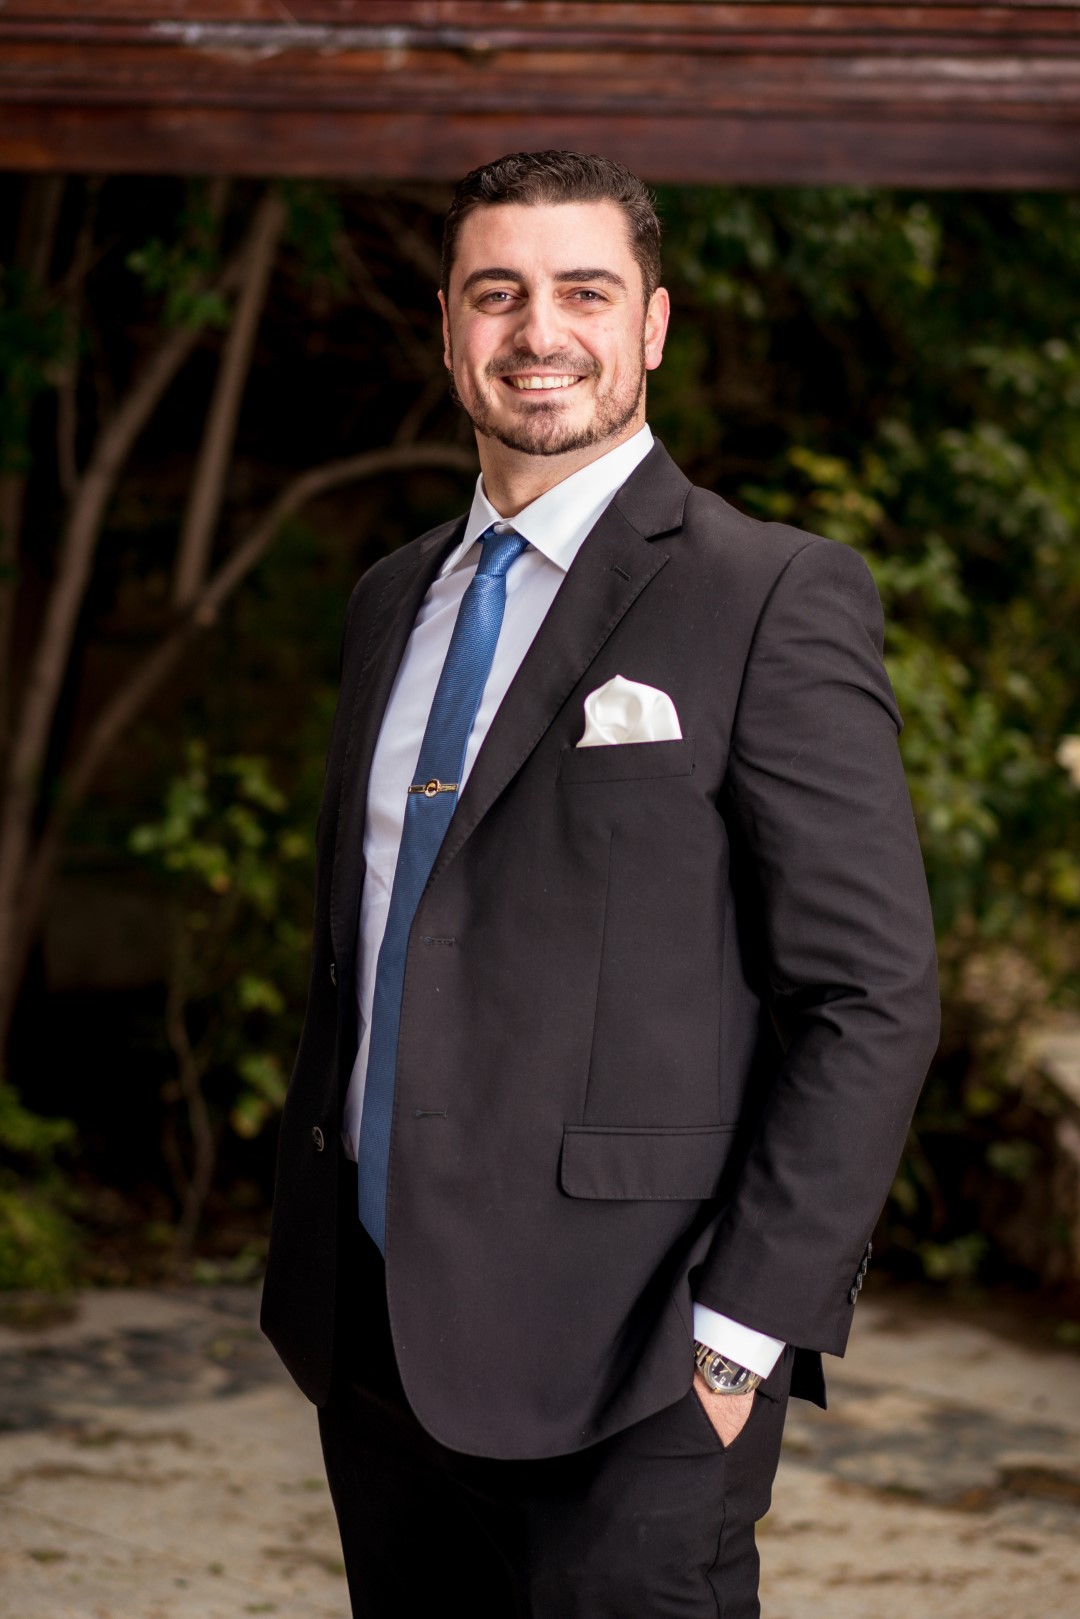 Serving with an Honor Code | Laith R. Khoury